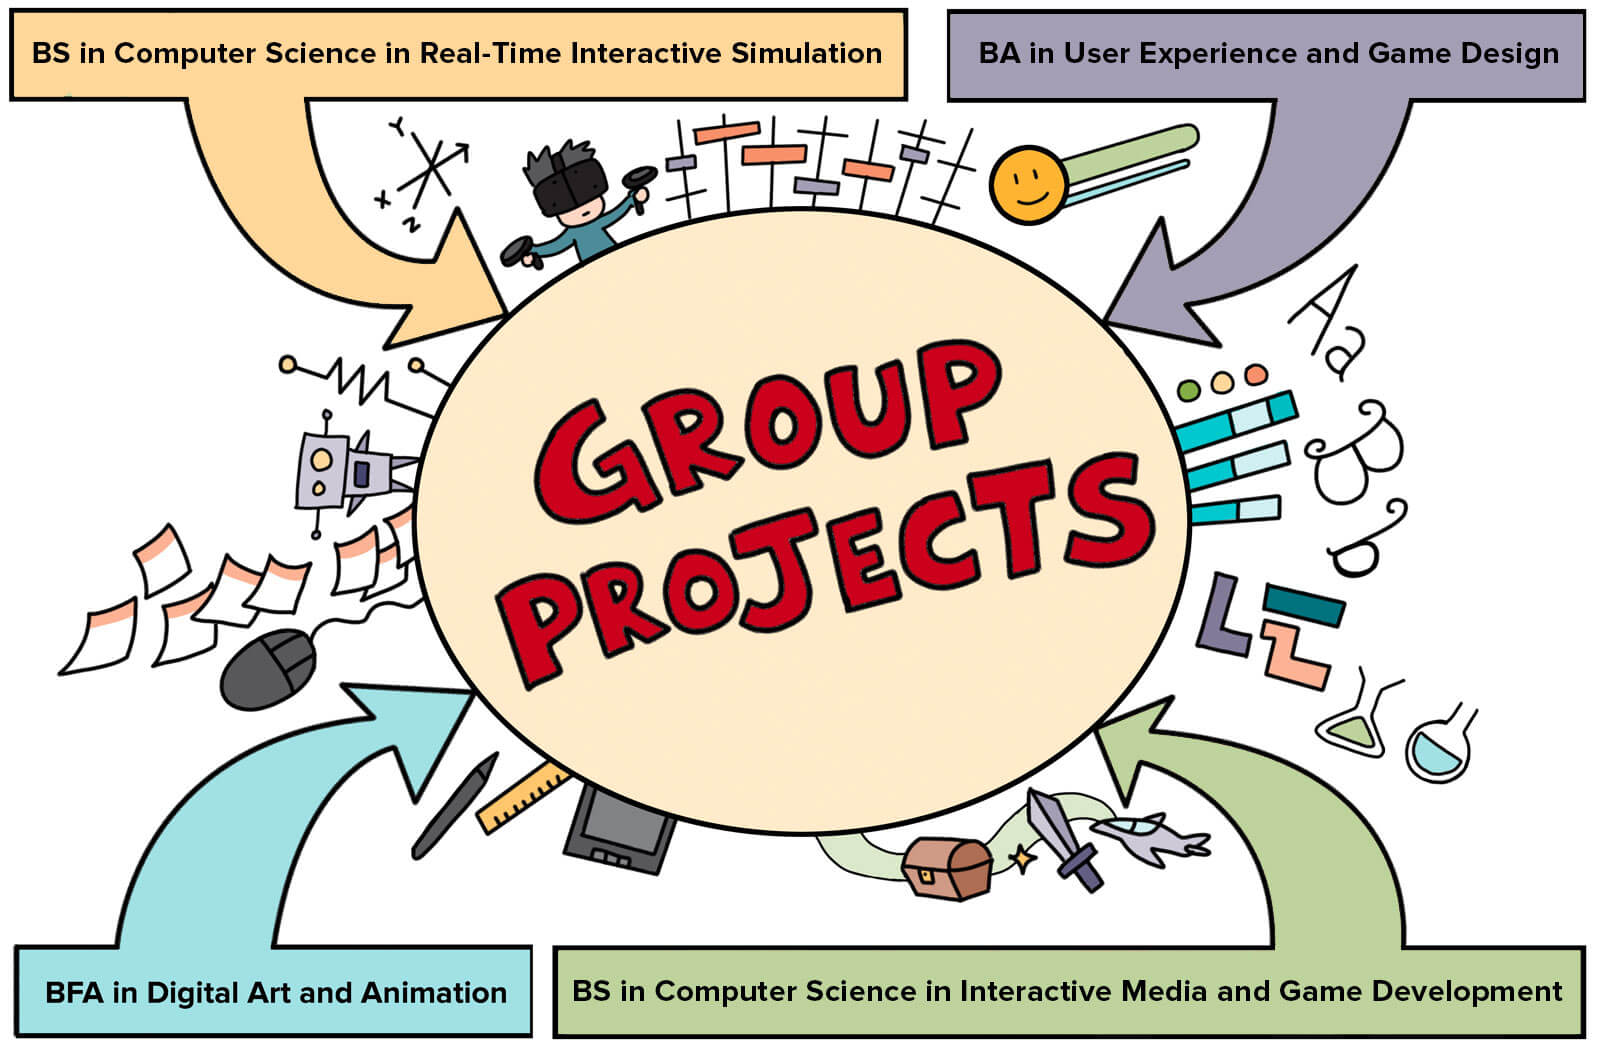 A comic focused on the importance of group projects within the four degree programs, including the BS in Computer Science in Real-Time Interactive Simulation, the BA in User Experience and Game Design, the BFA in Digital Art and Animation, and the BS in Computer Science in Interactive Media and Game Development.